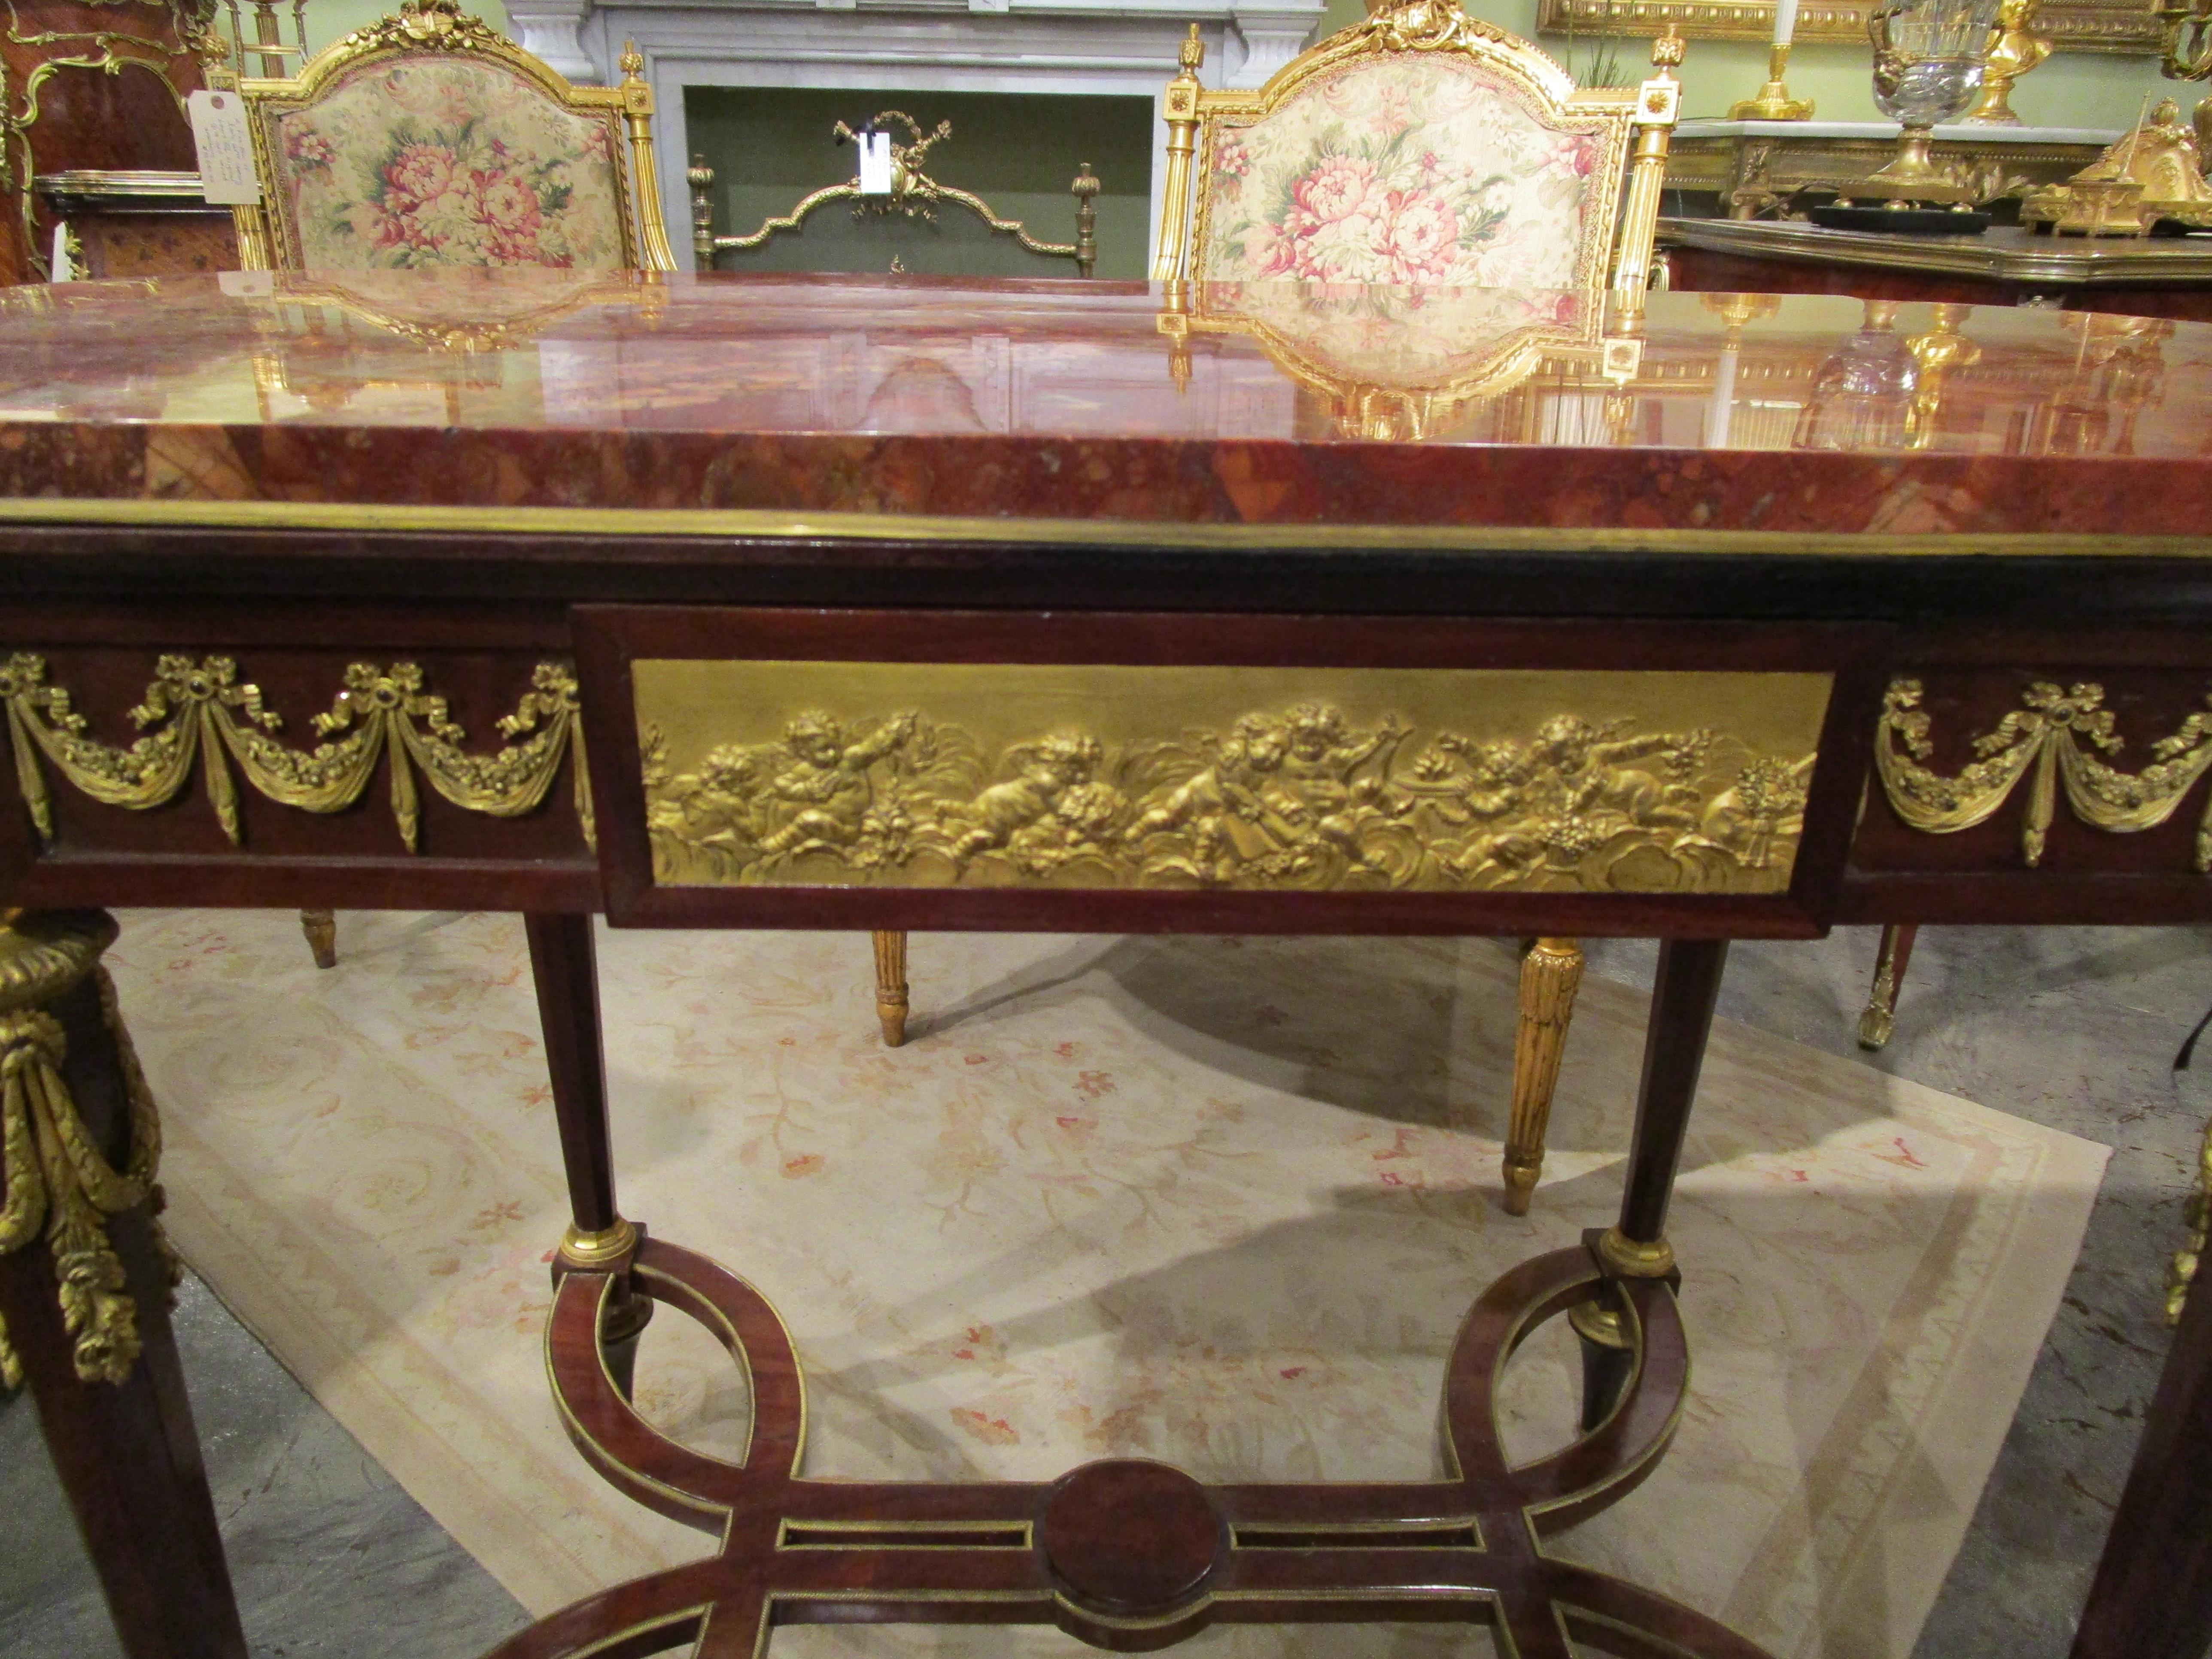 A fine 19th century French mahogany and gilt bronze mounted Louis XVI marble top table . Finest gilt bronze Louis XVI mounts . Secret mechanical drawer . 